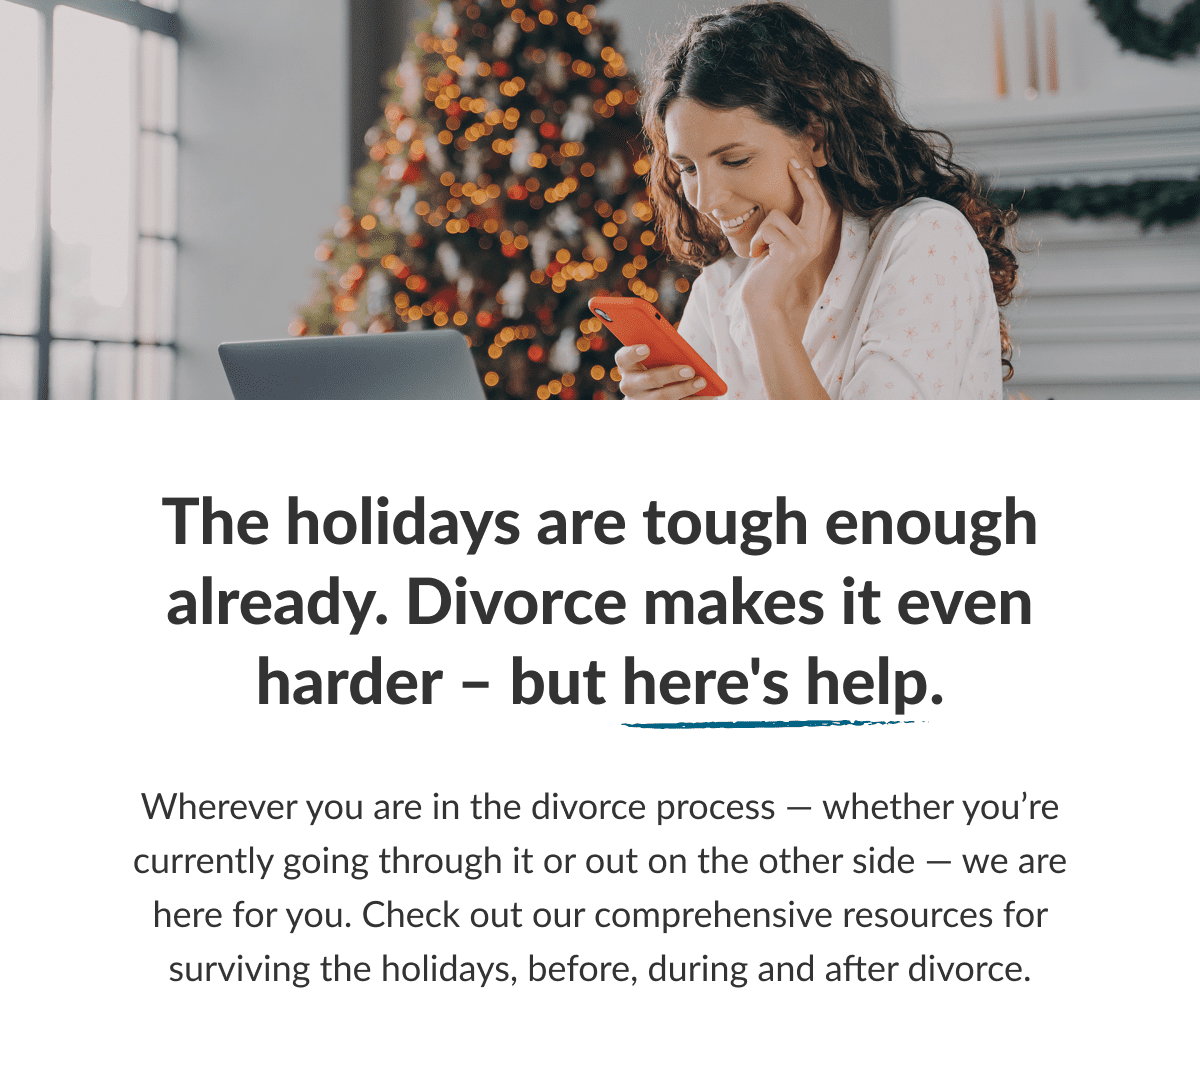 Surviving the holidays before, during, and after divorce